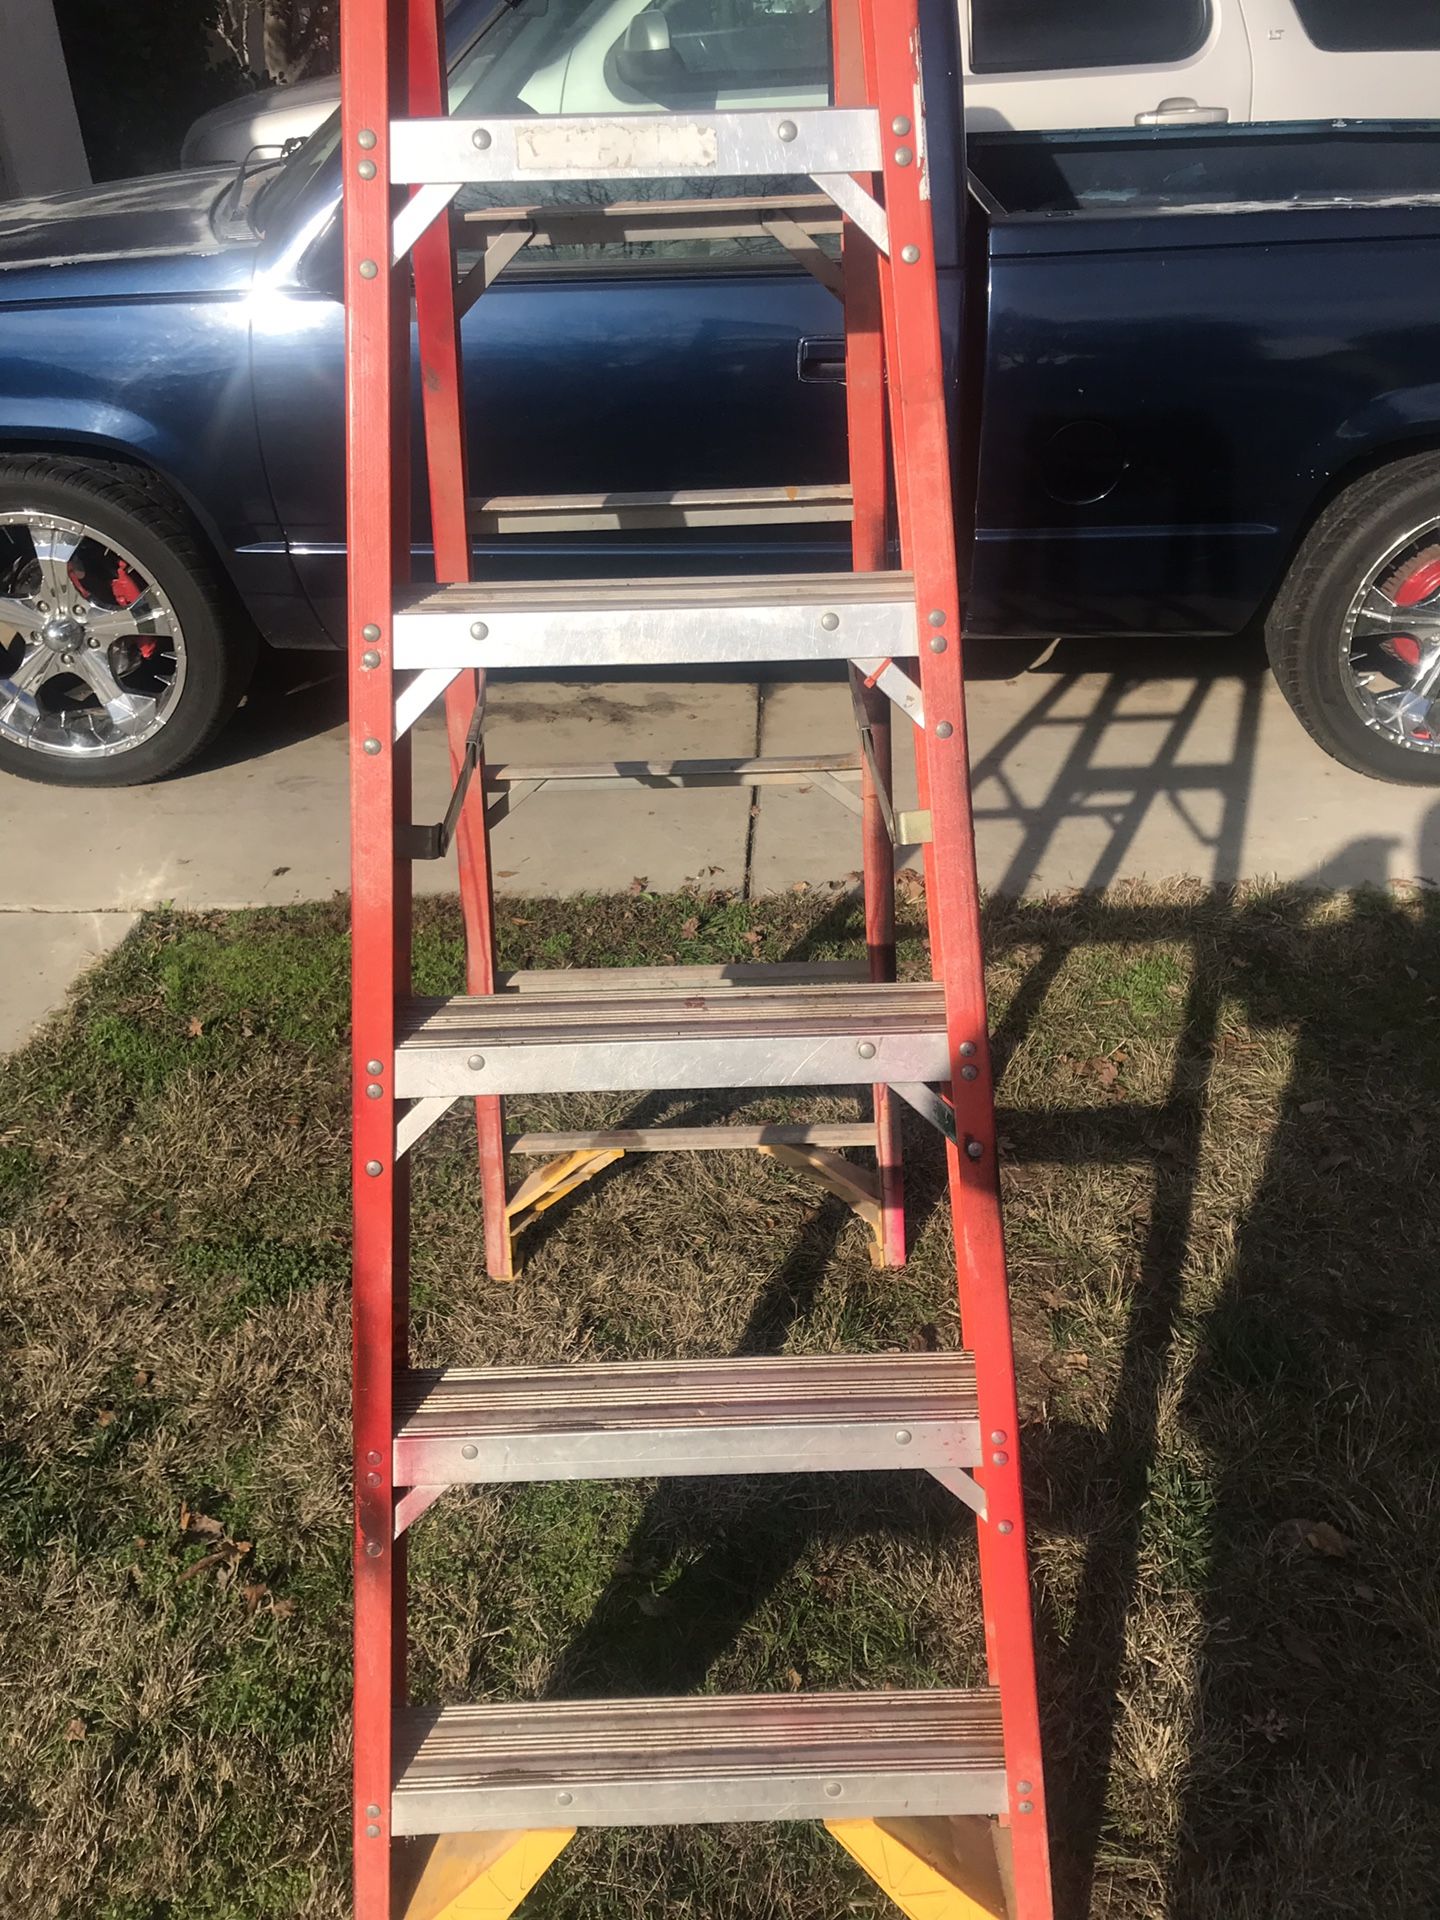 Another 6’ft ladder for sell. Asking 60.00 dollars for it